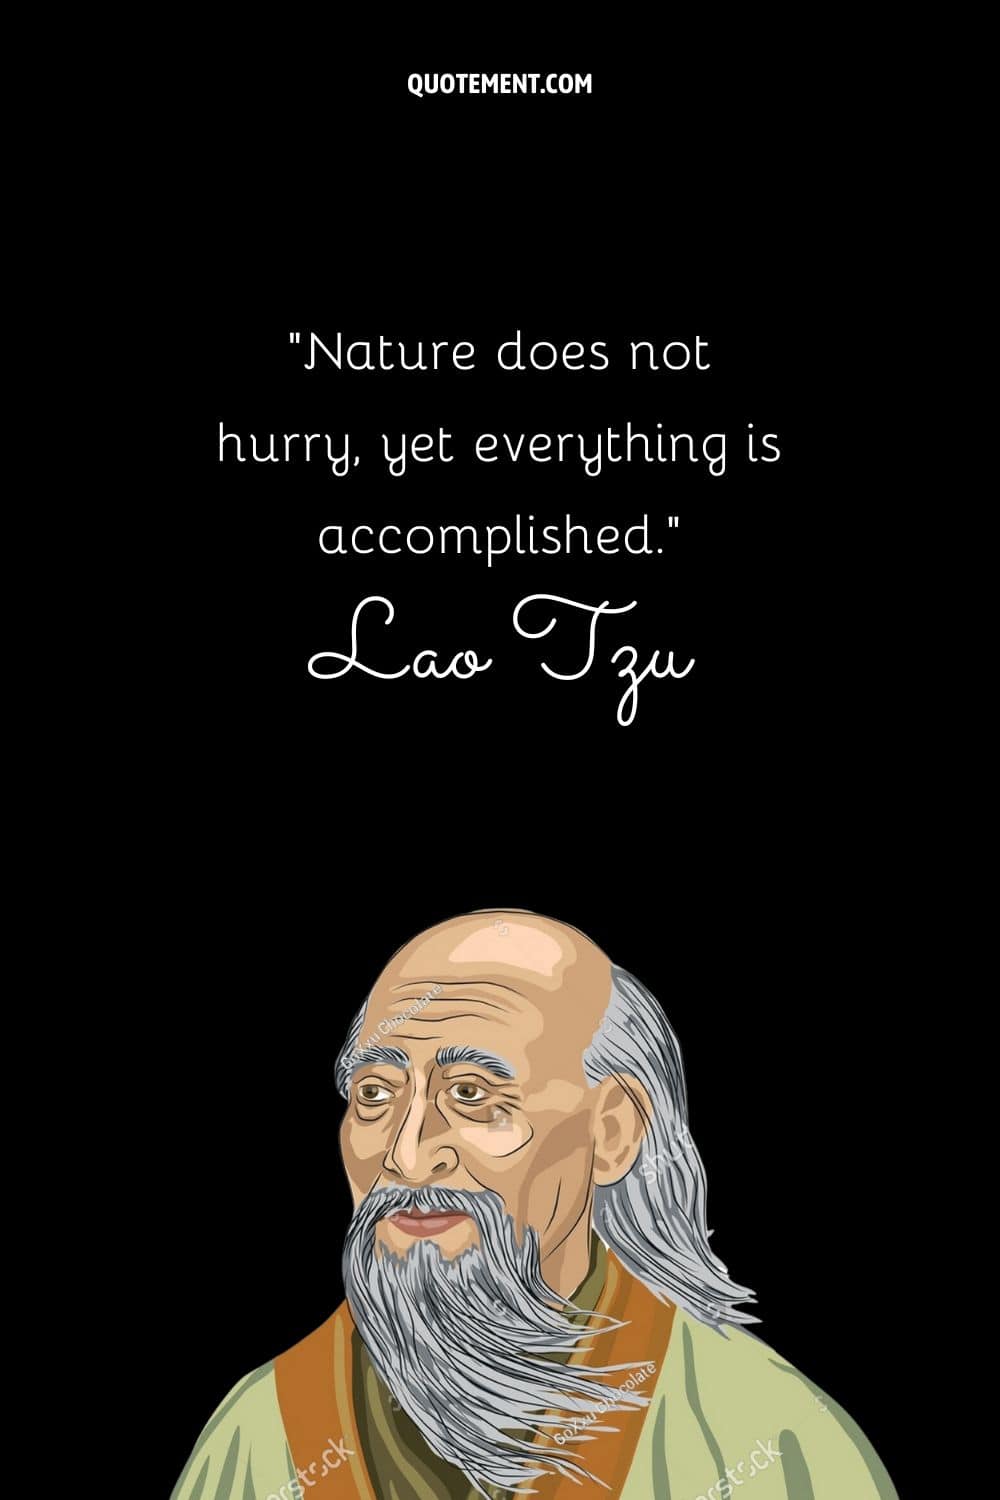 Nature does not hurry, yet everything is accomplished